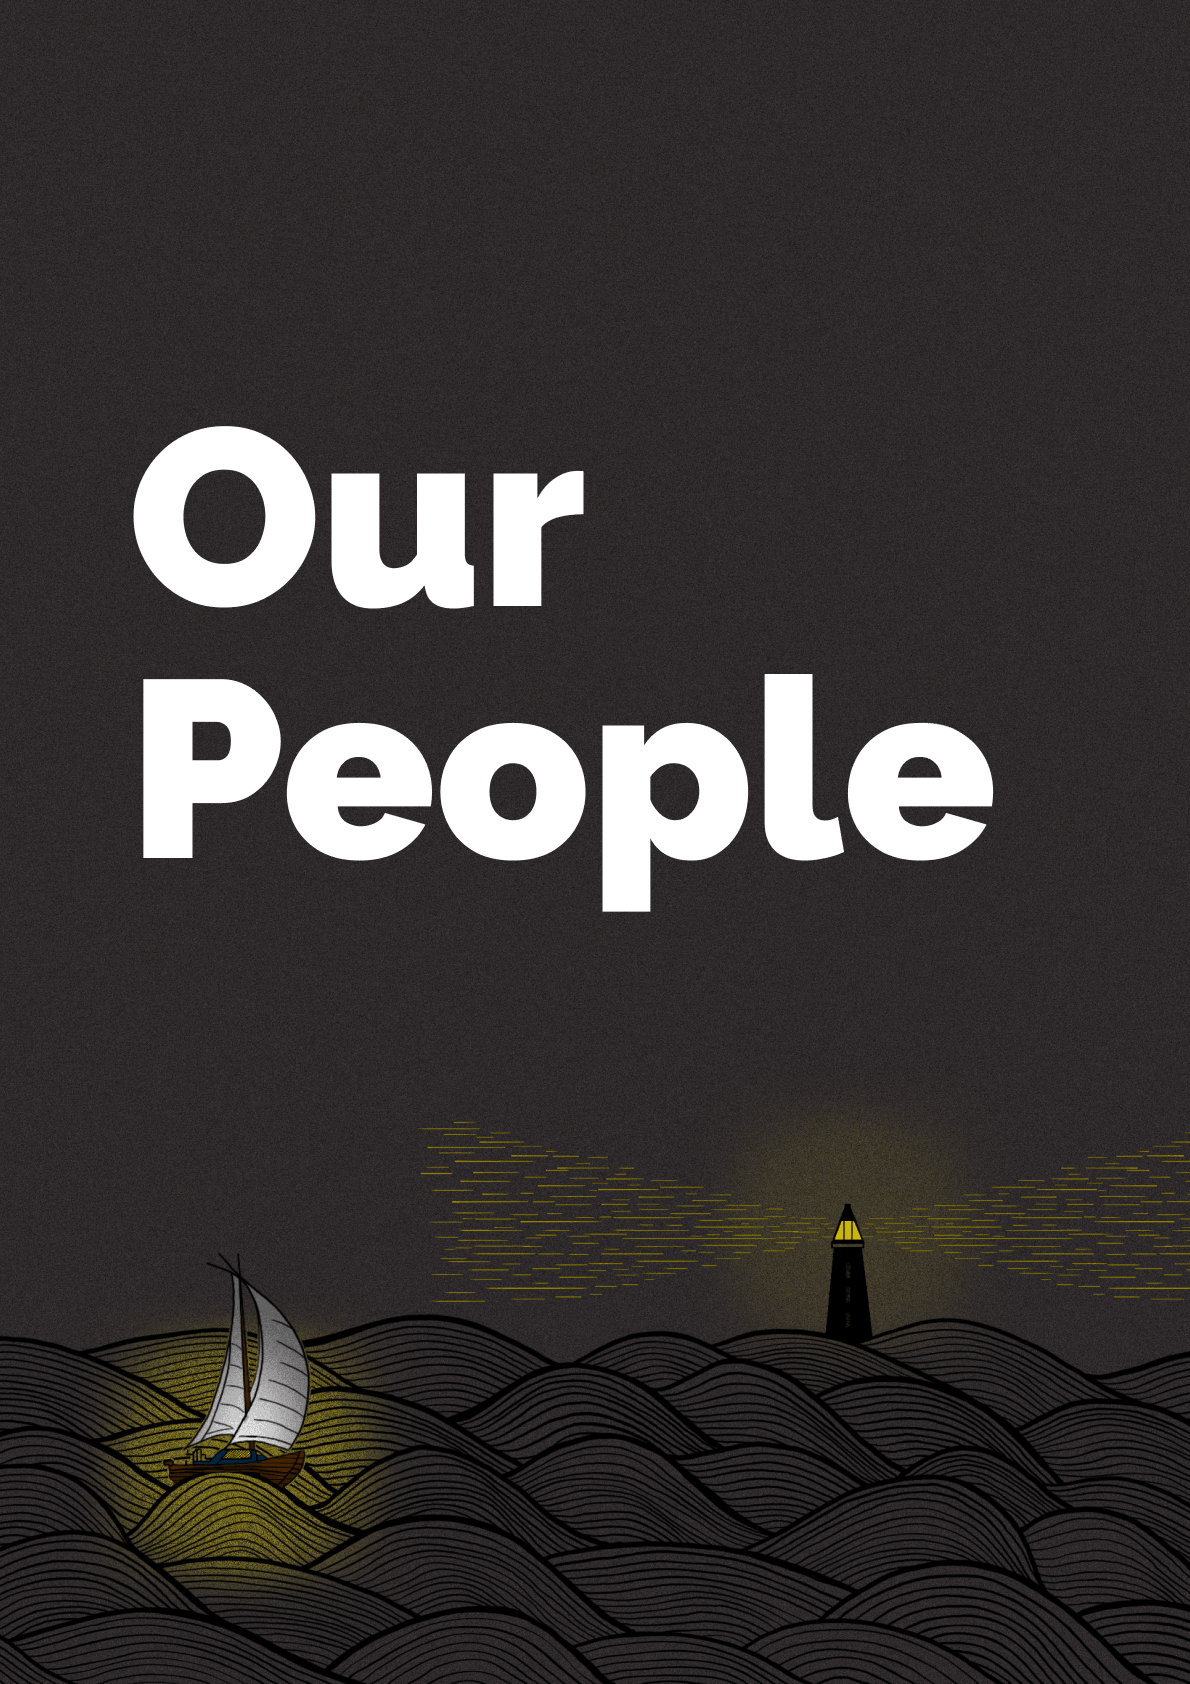 a boat and lighthouse at sea at night with text "our people"